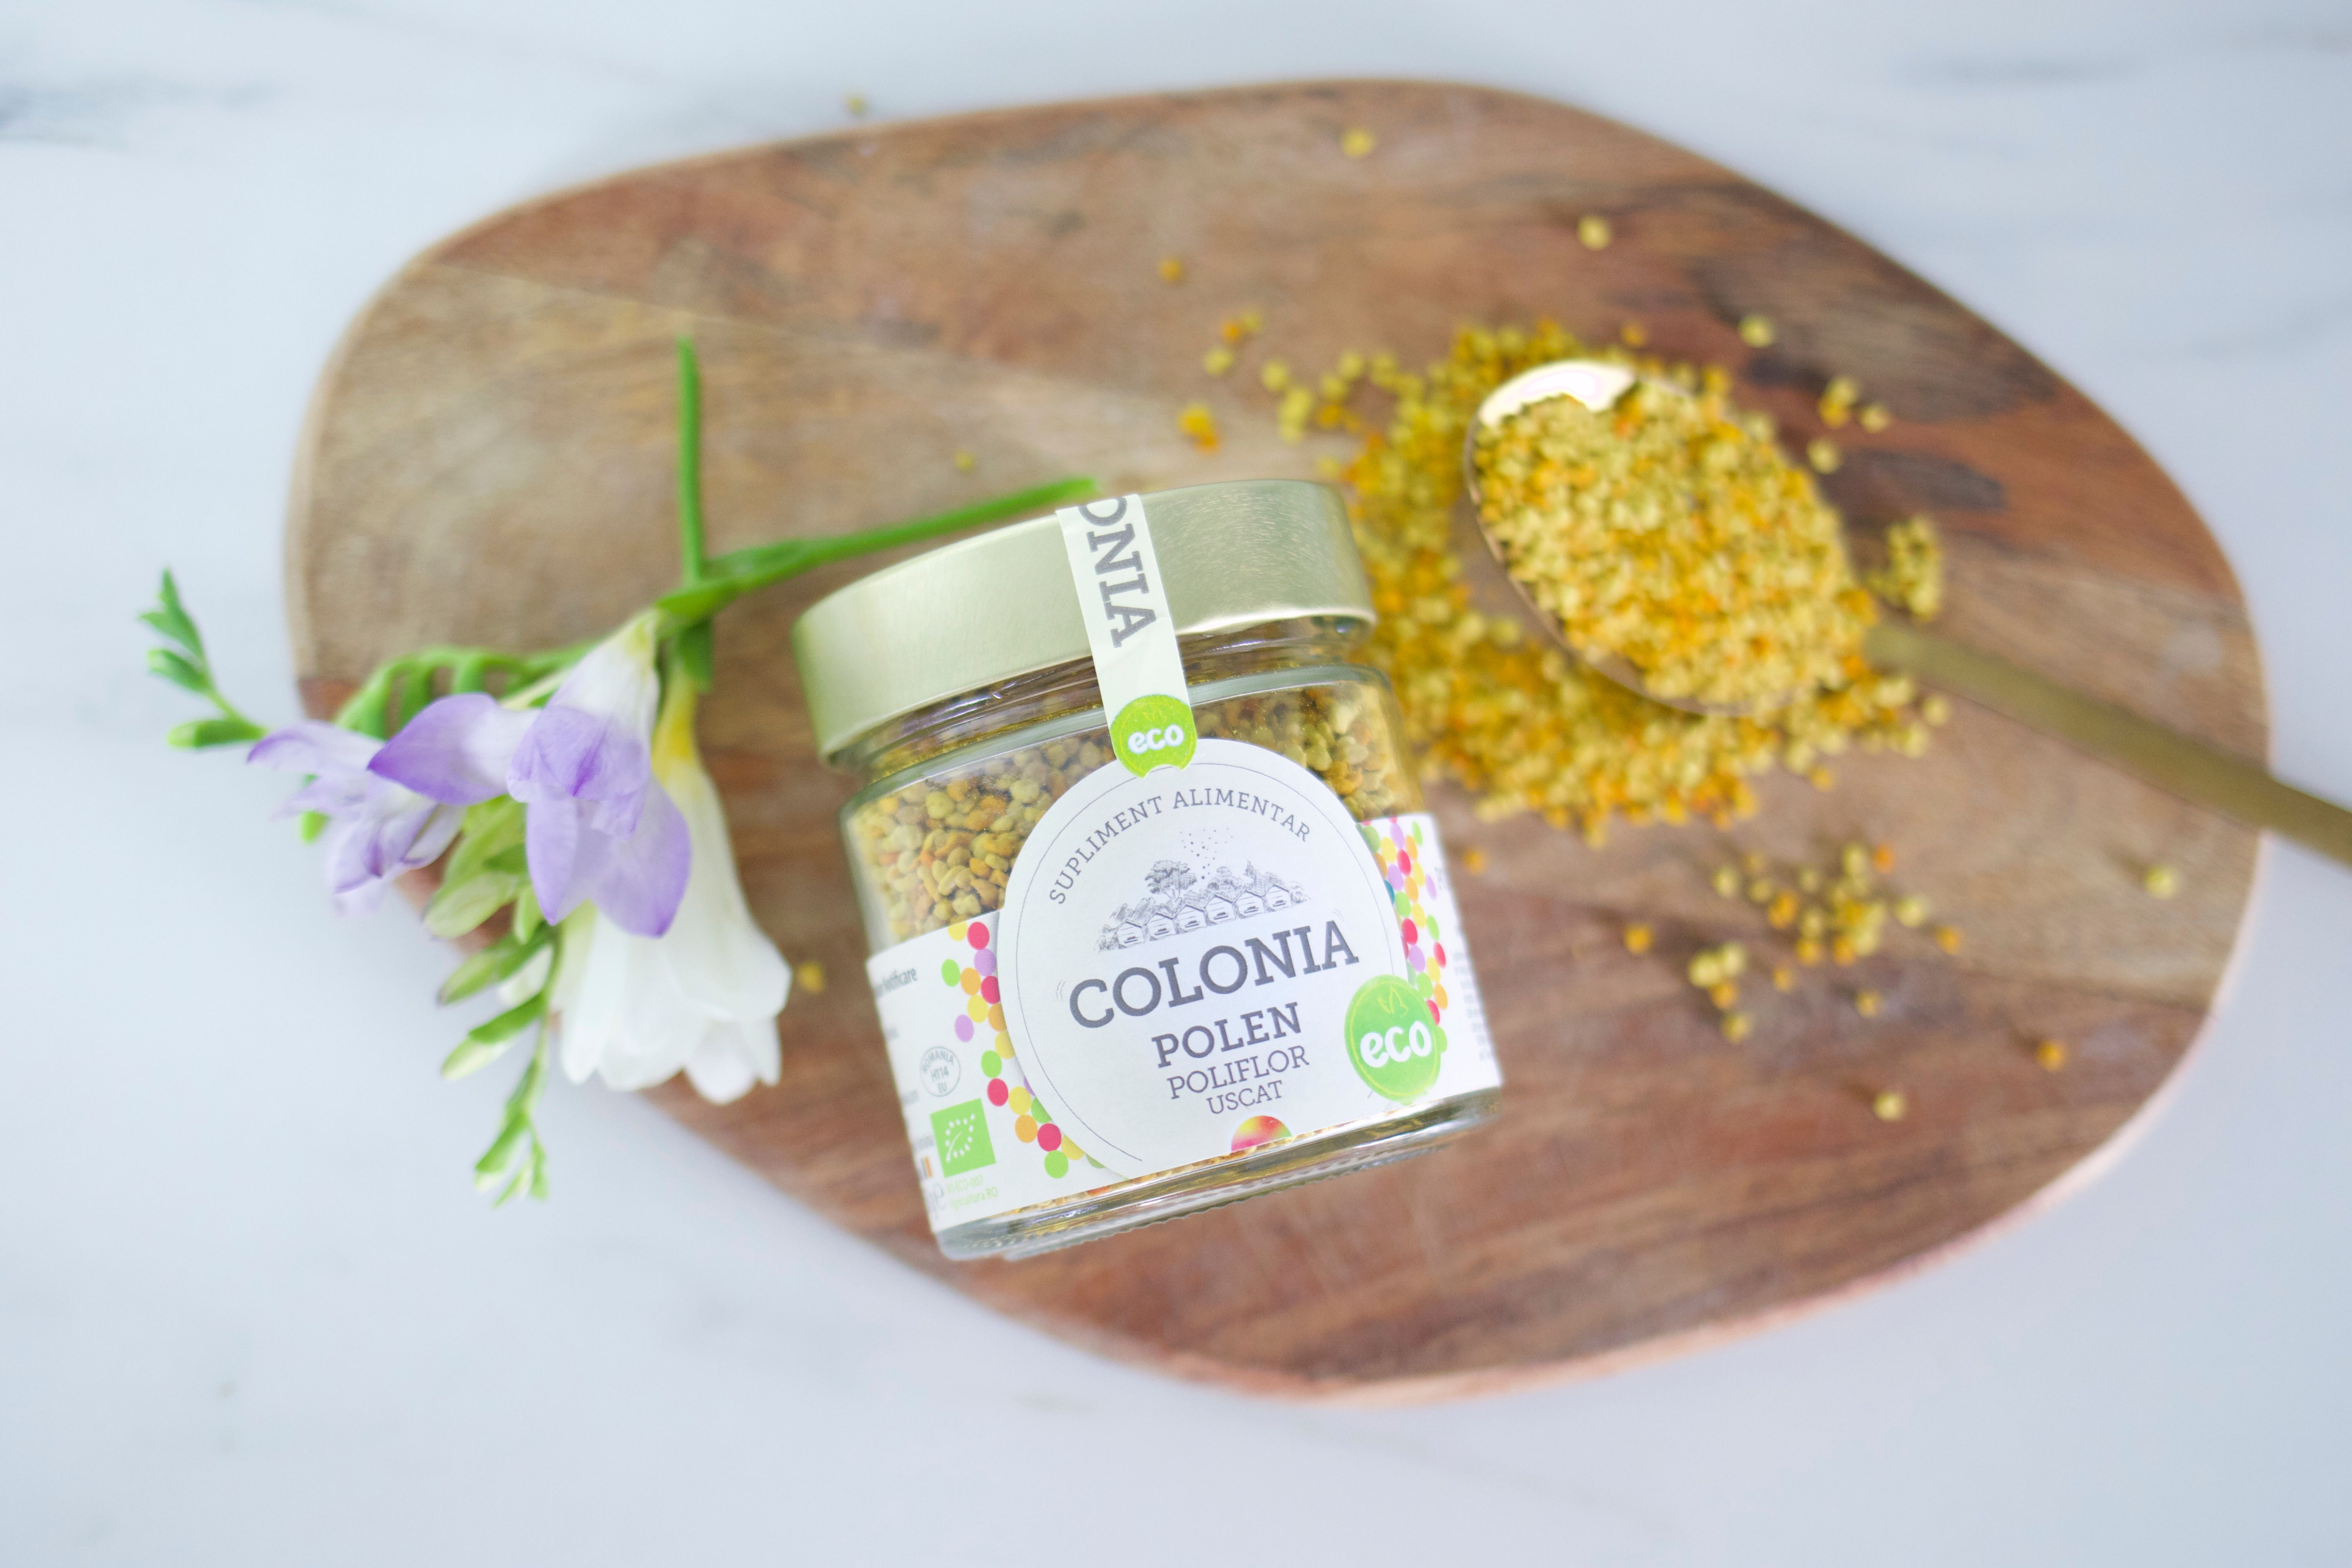 Bee pollen by Colonia